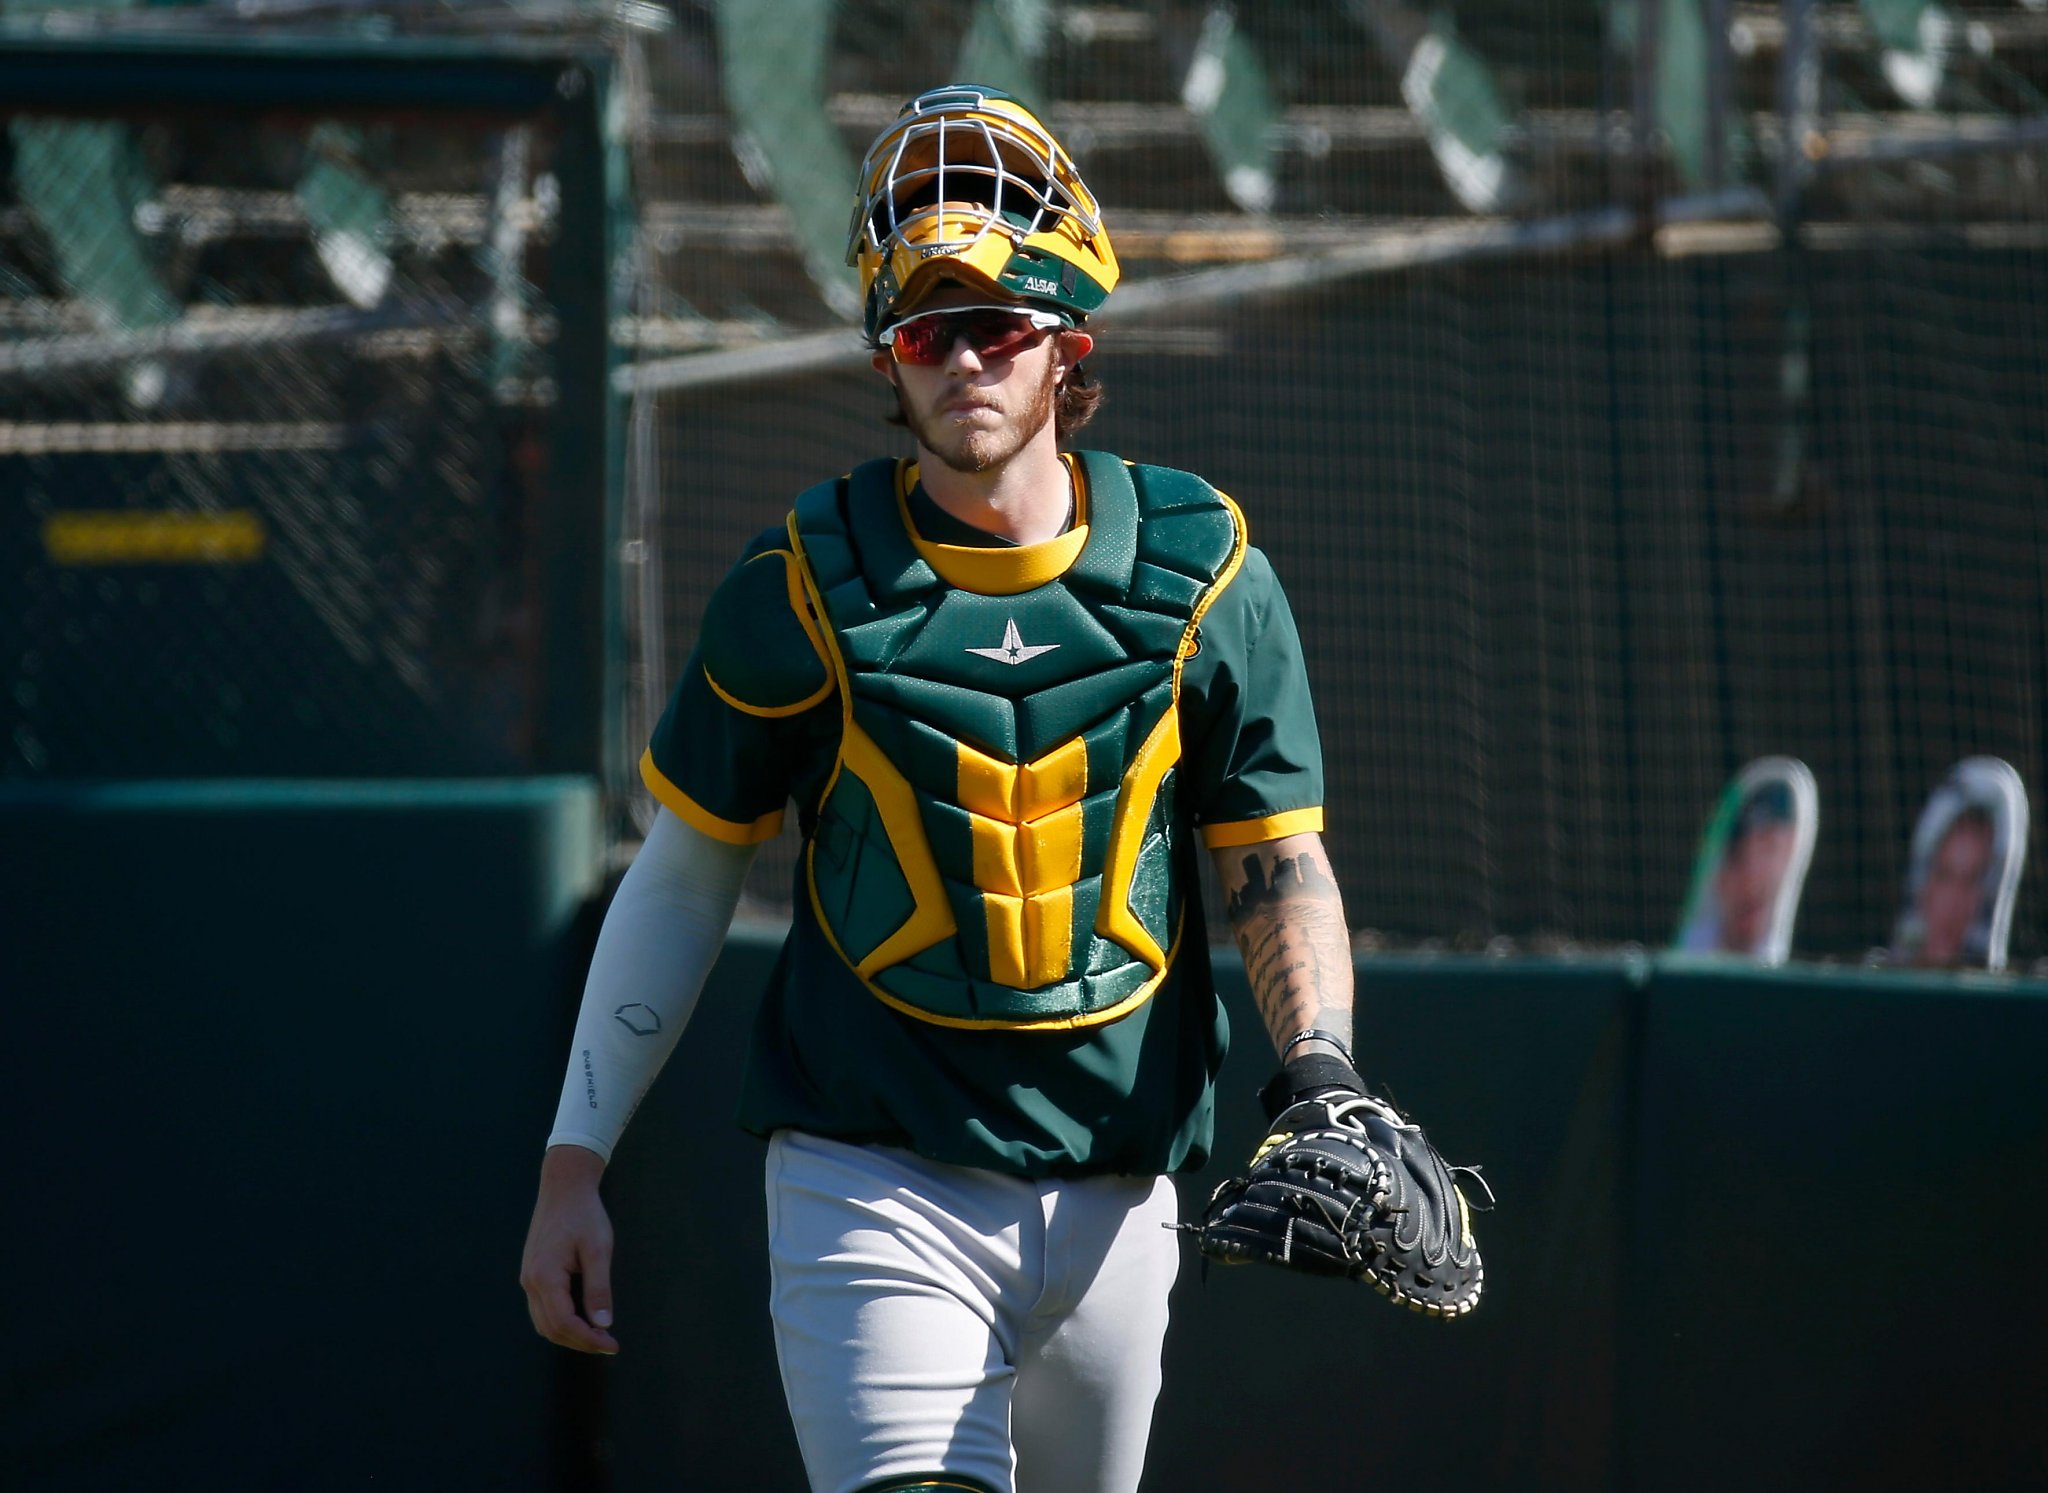 A's catcher Jonah Heim goes 1-for-3 in MLB debut at Texas